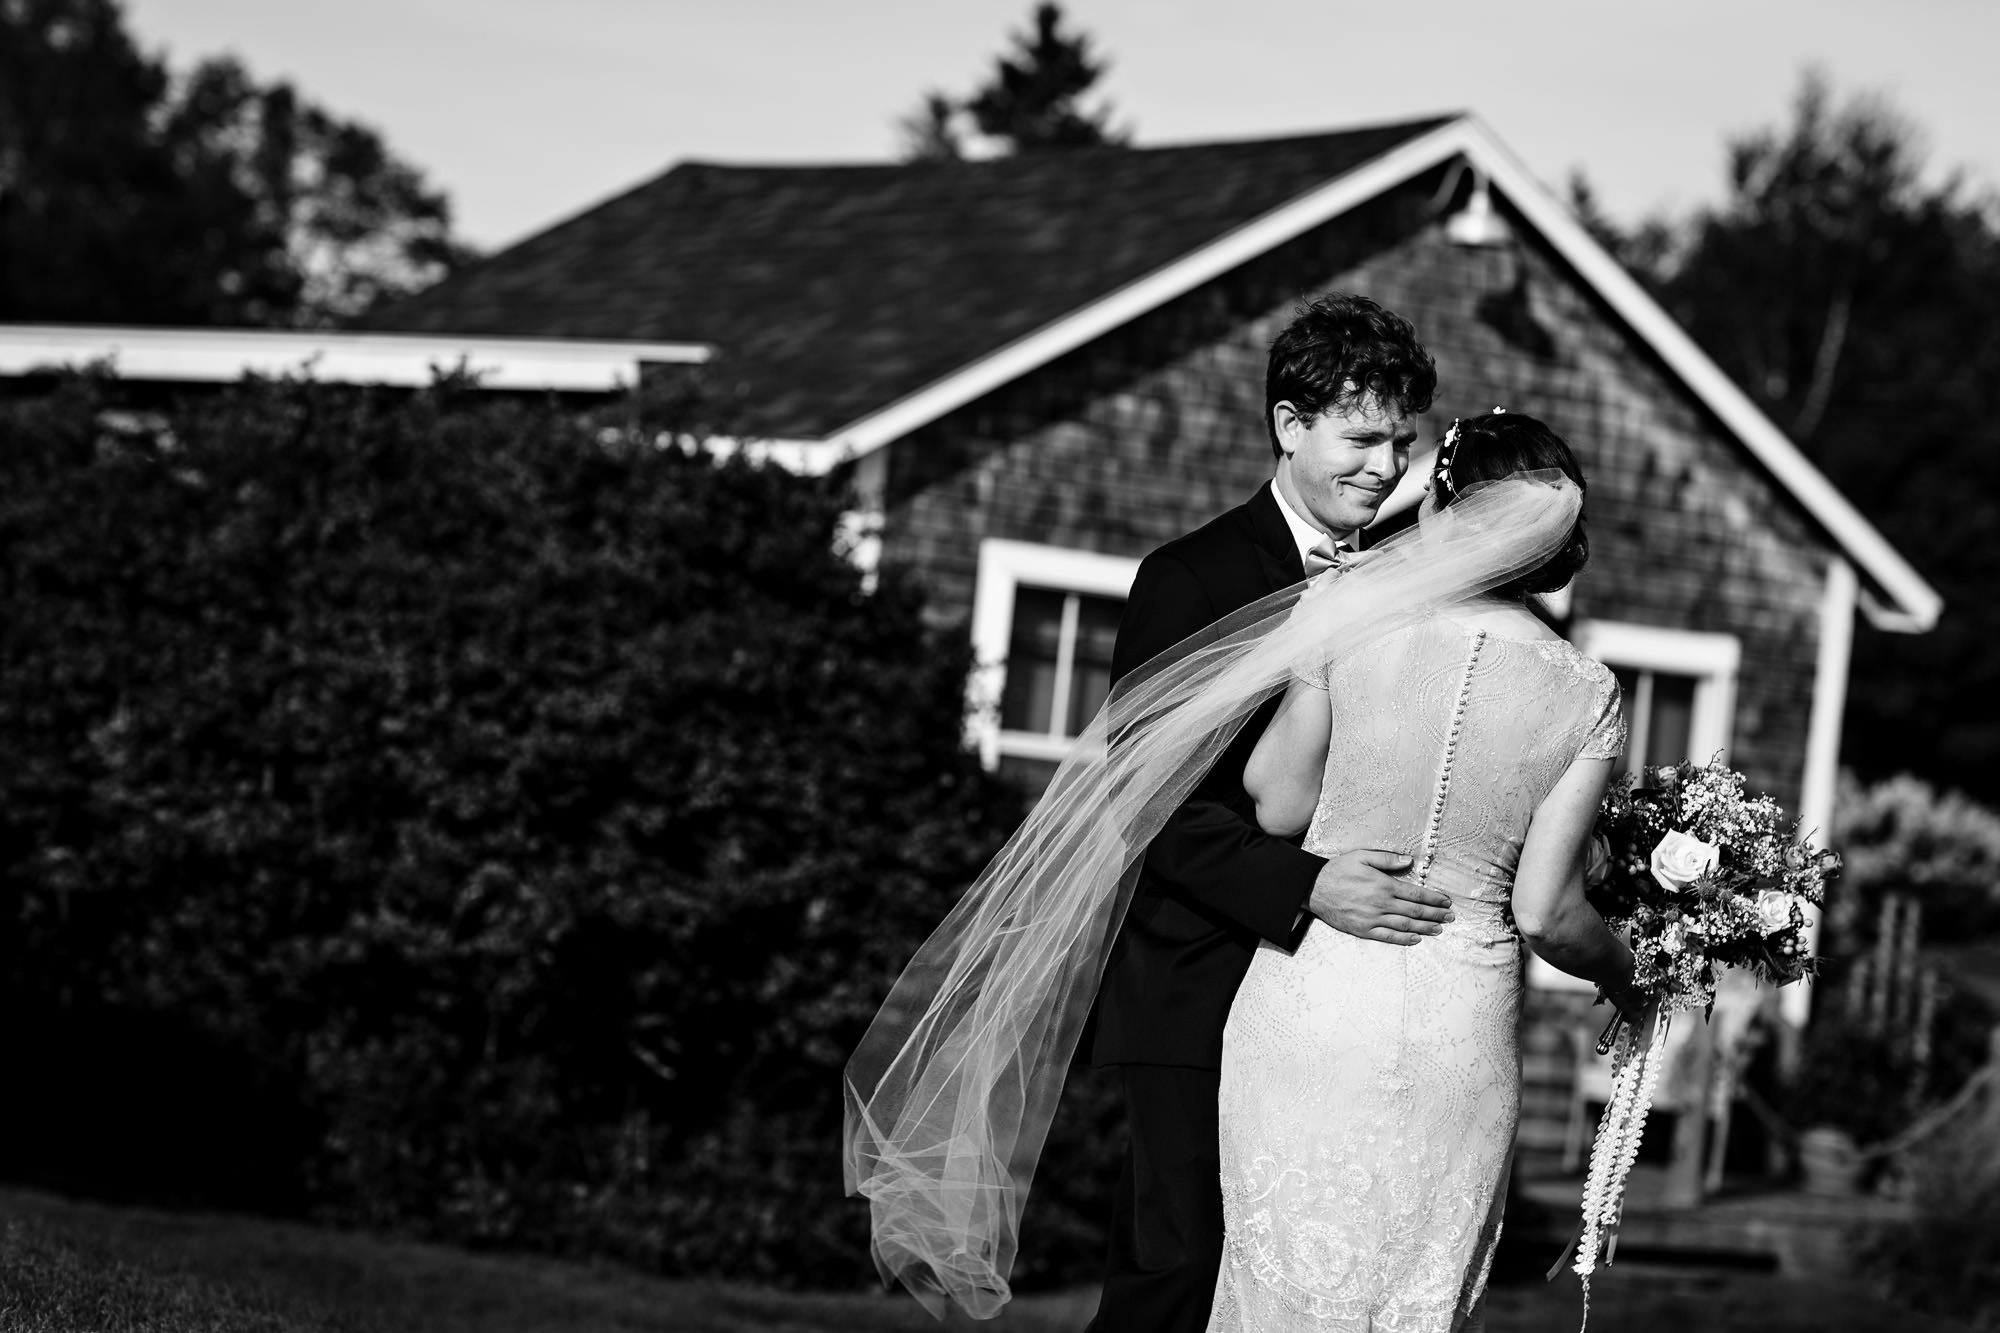 The bride and groom share a candid moment at their midcoast Maine wedding